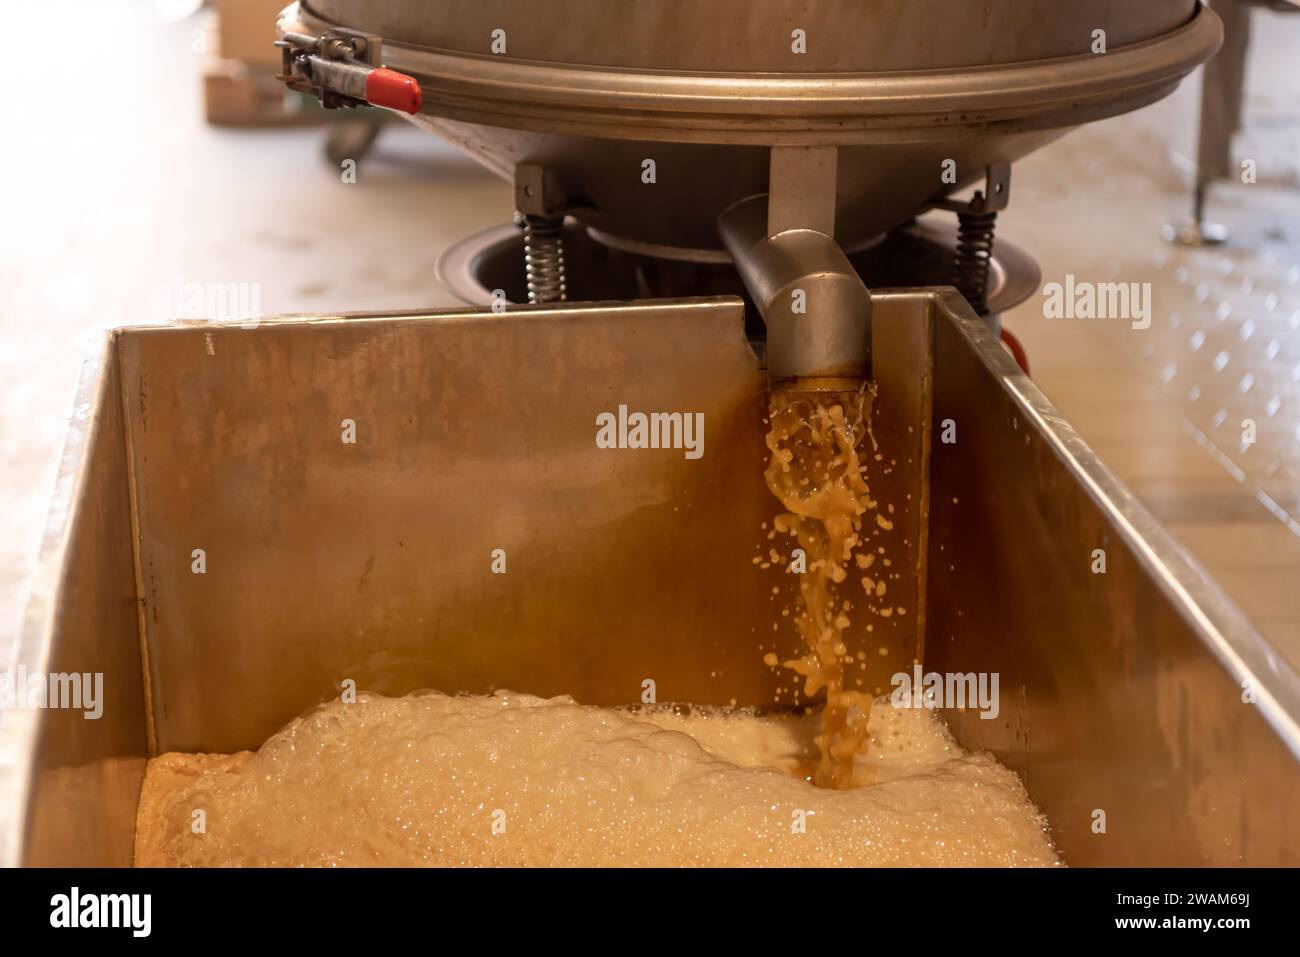 Vibrating sieve used in the apple juice production process Stock Photo